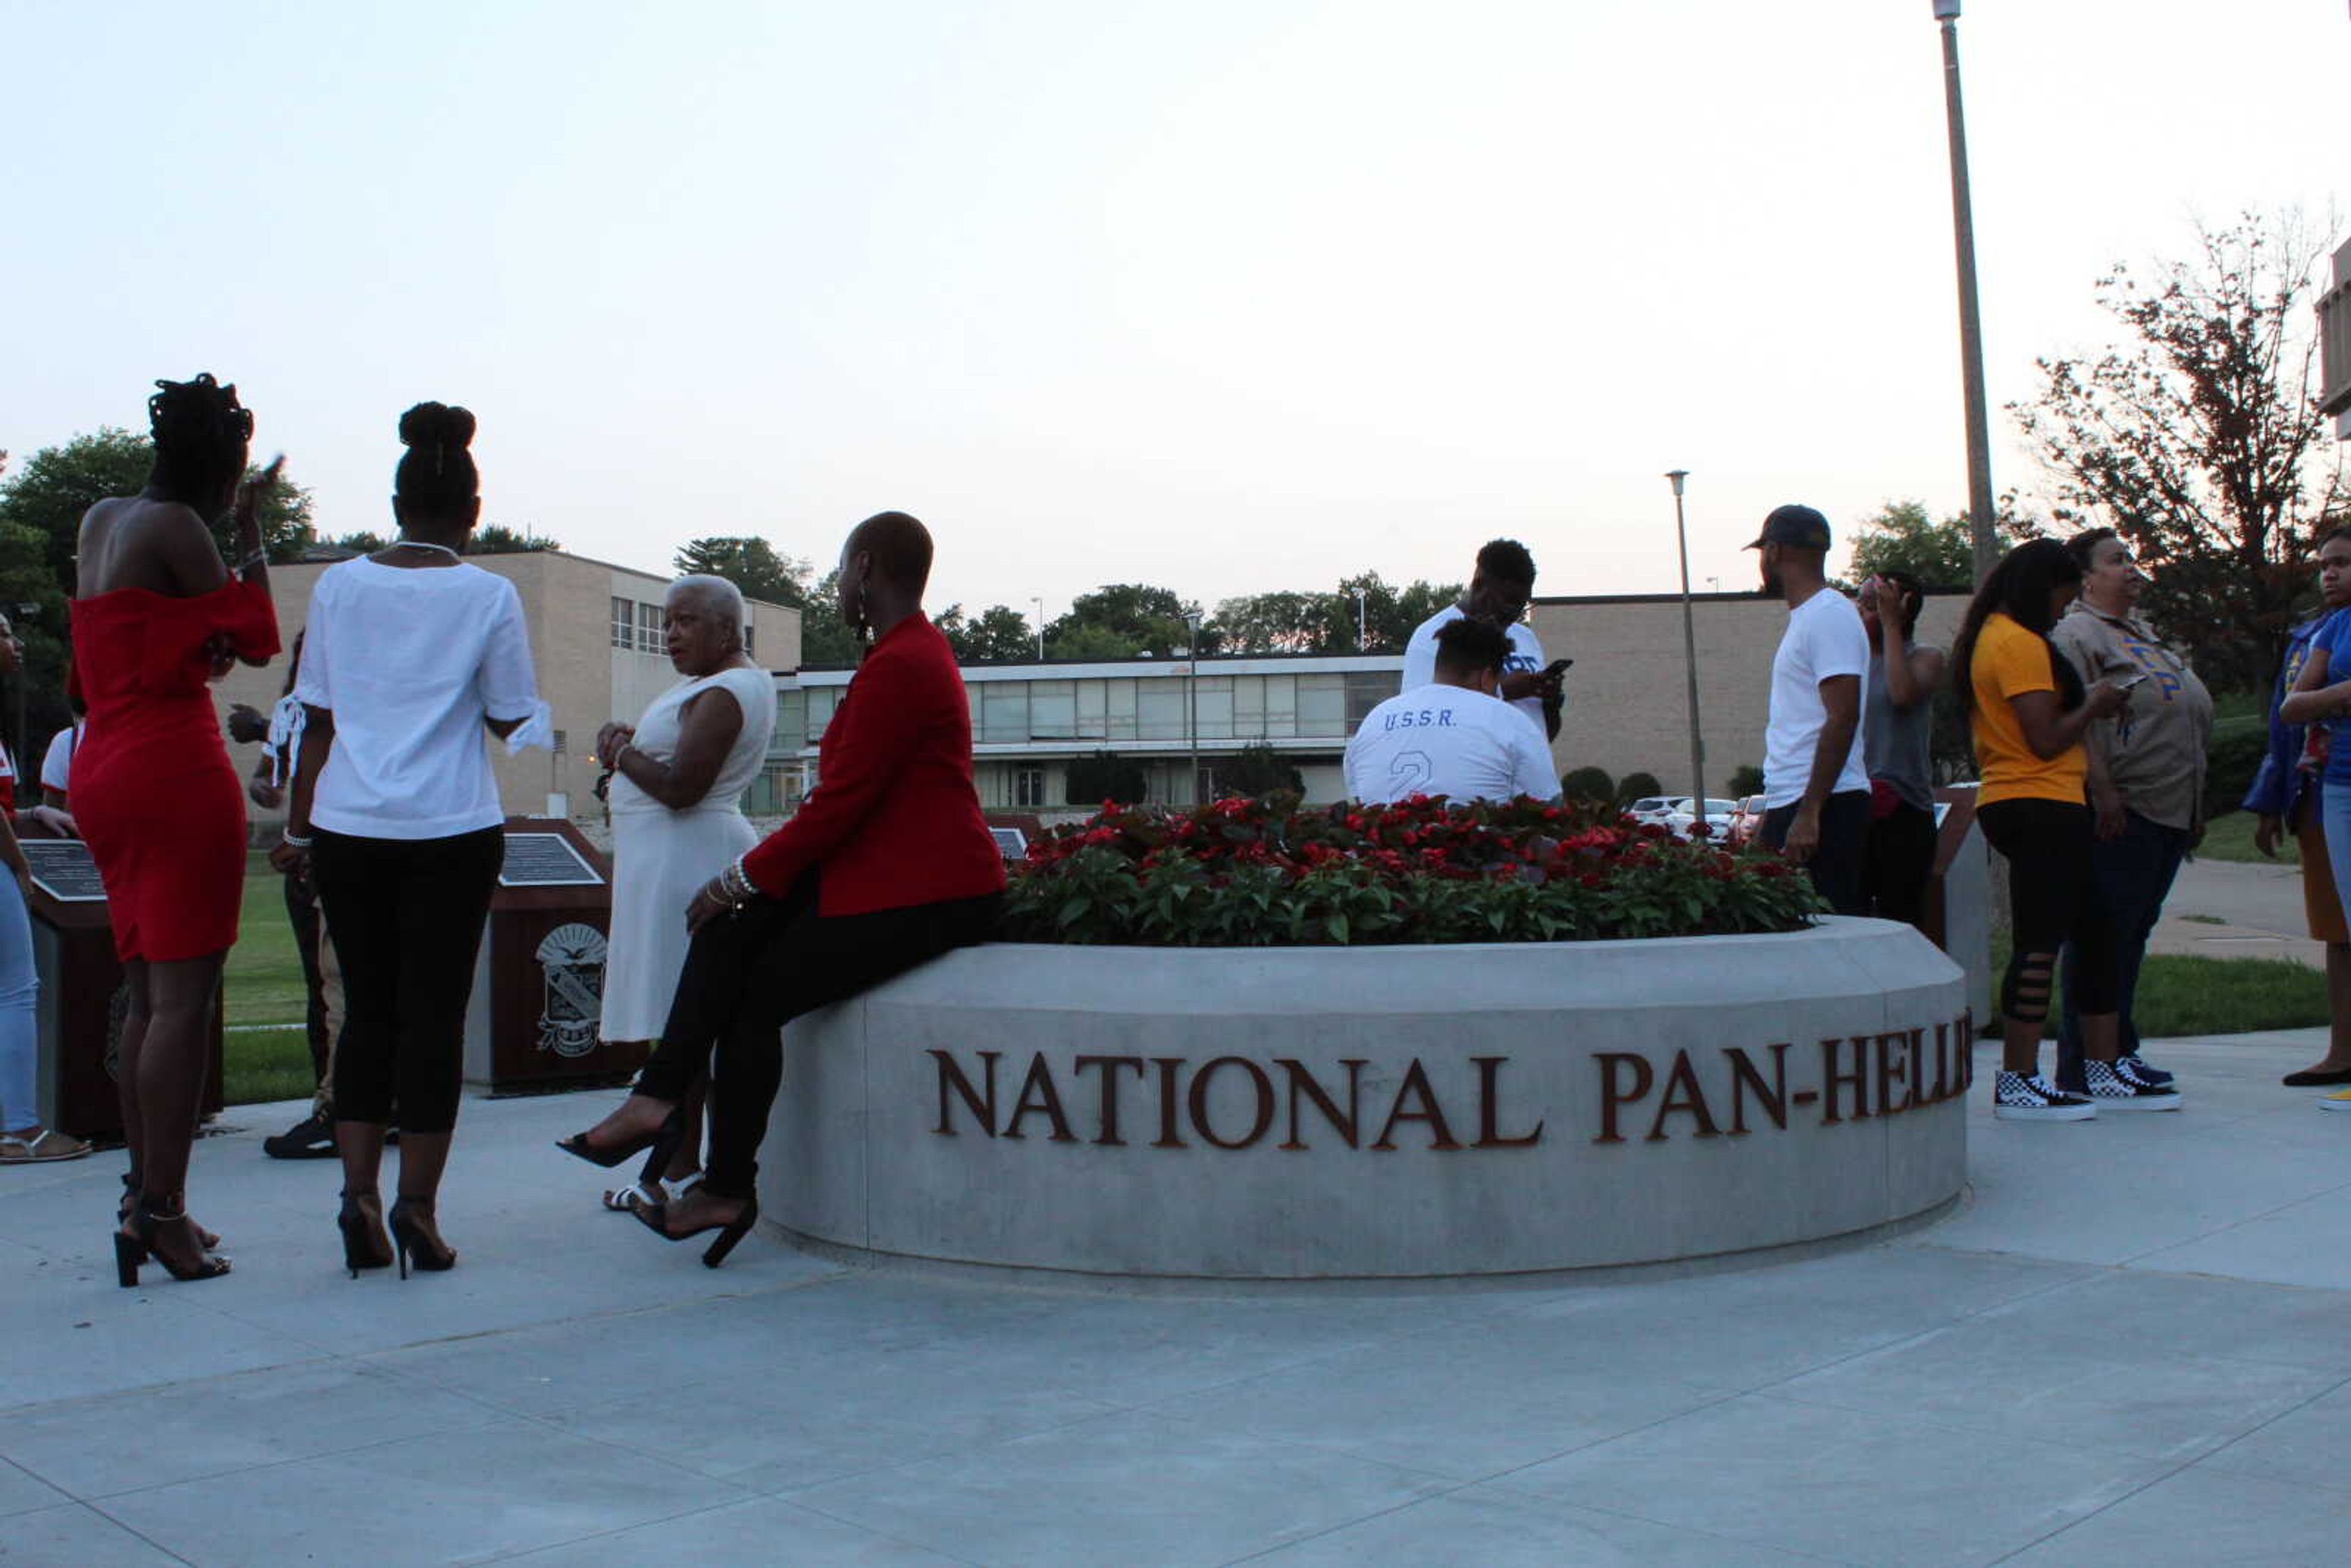 Attendees of the NPHC Plaza opening ceremony socialize and admire the new addition to Southeast's campus.